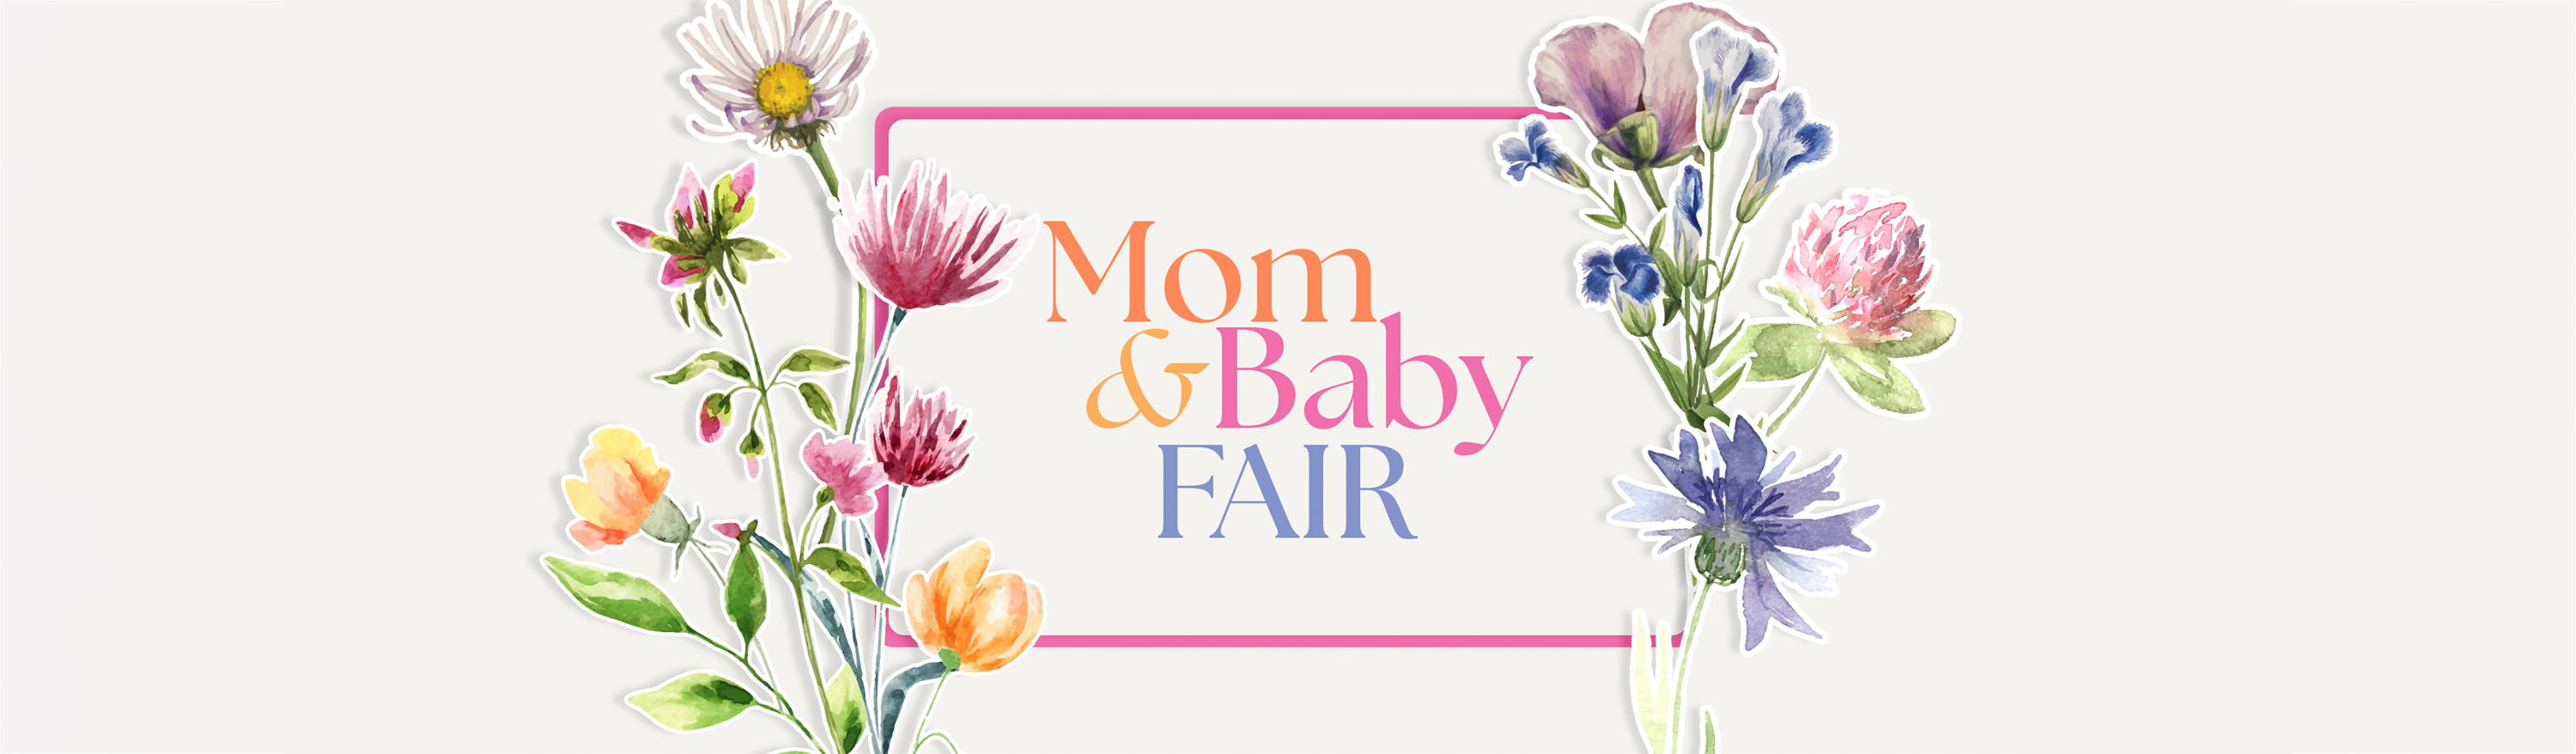 Mom & Baby Fair: Online Offers